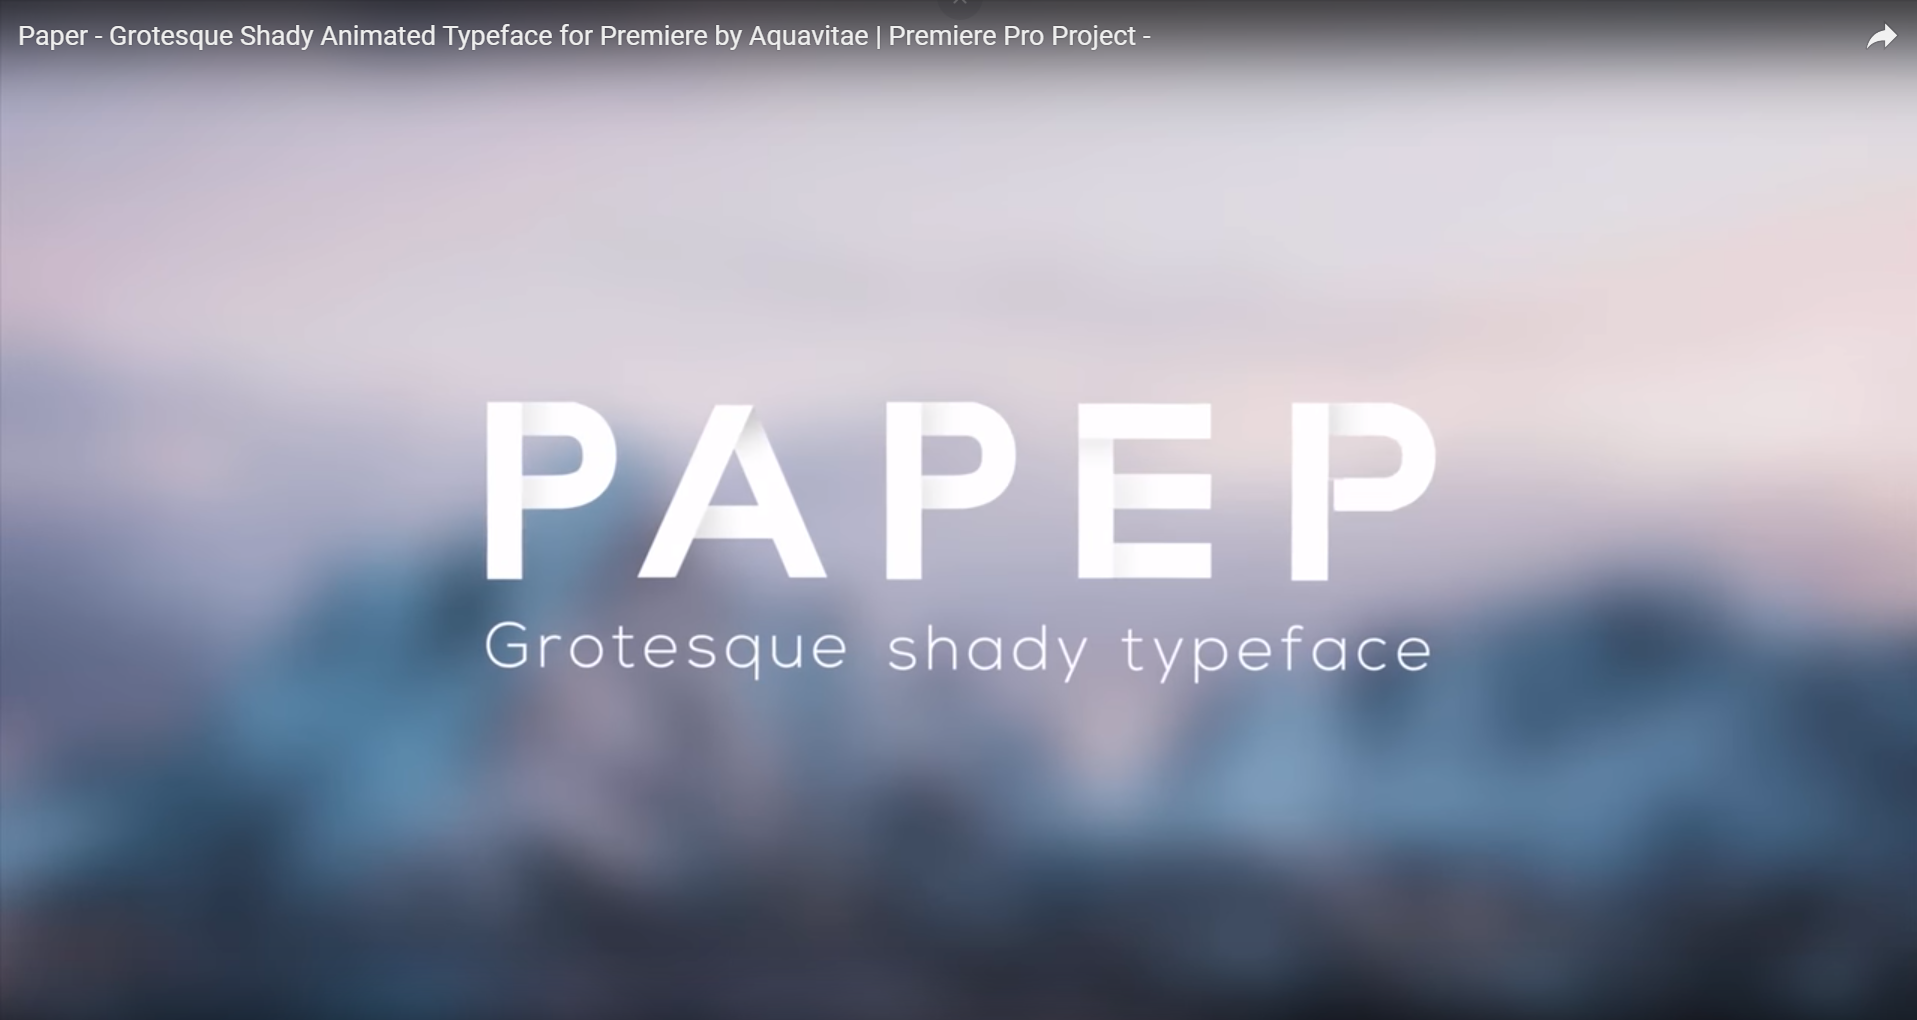 Paper - Grotesque Shady Animated Typeface for Premiere